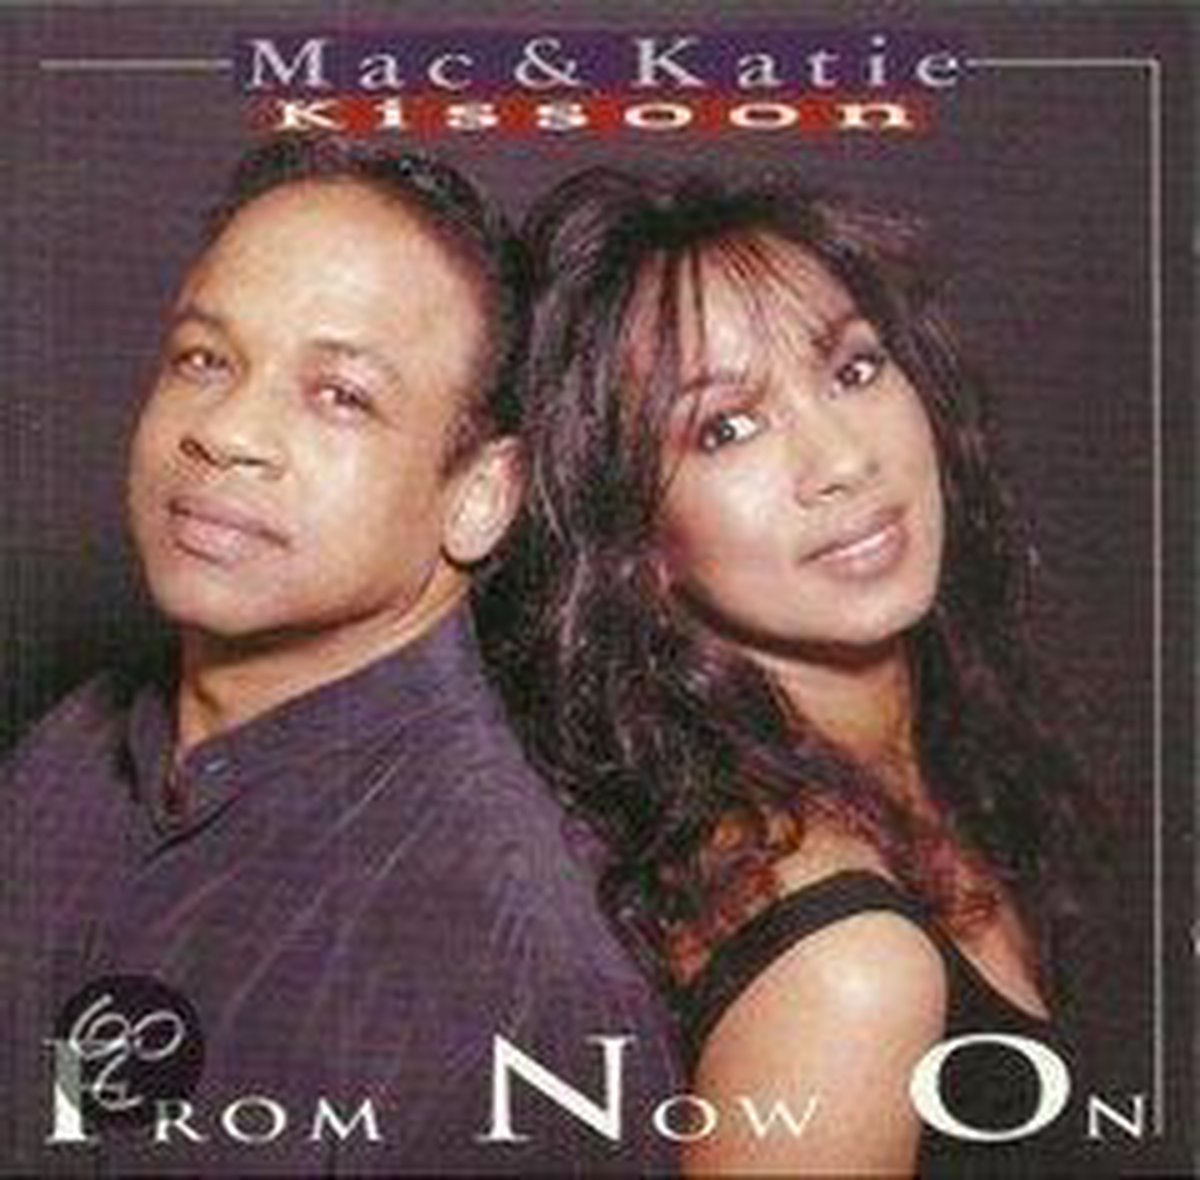 From now on - MAC & KATIE KISSOON